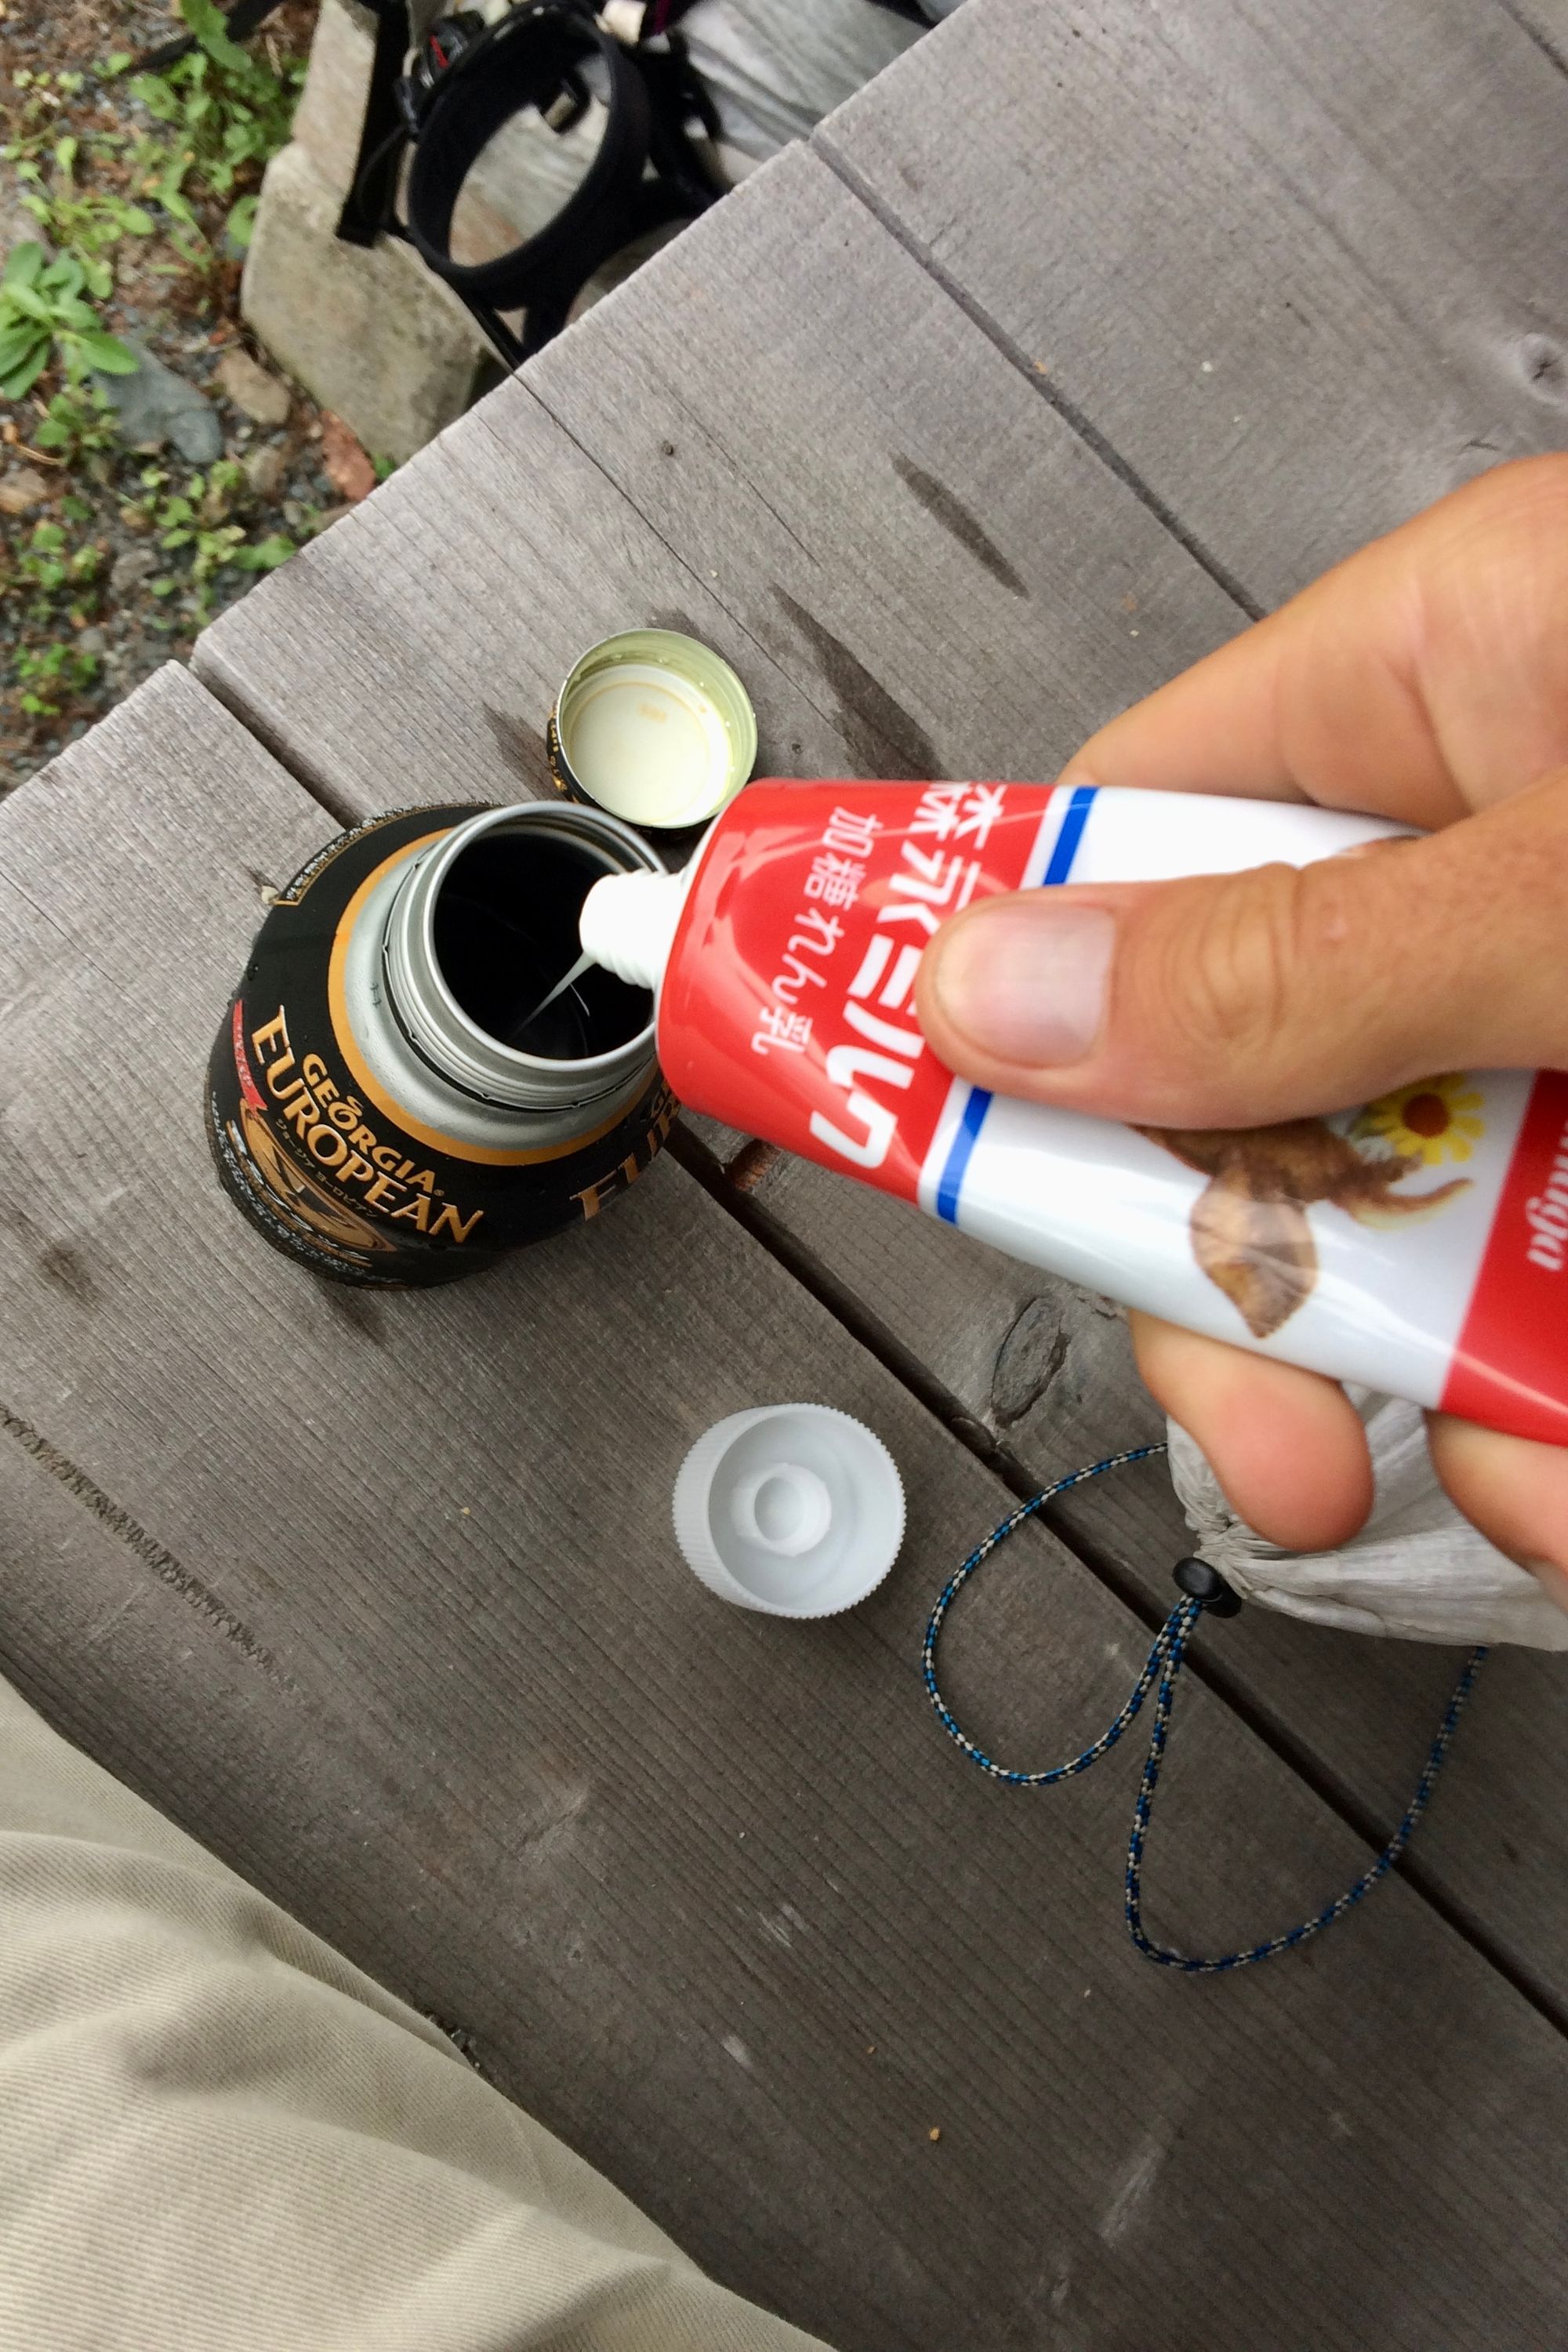 The author squeezes condensed milk into a metal can of coffee.